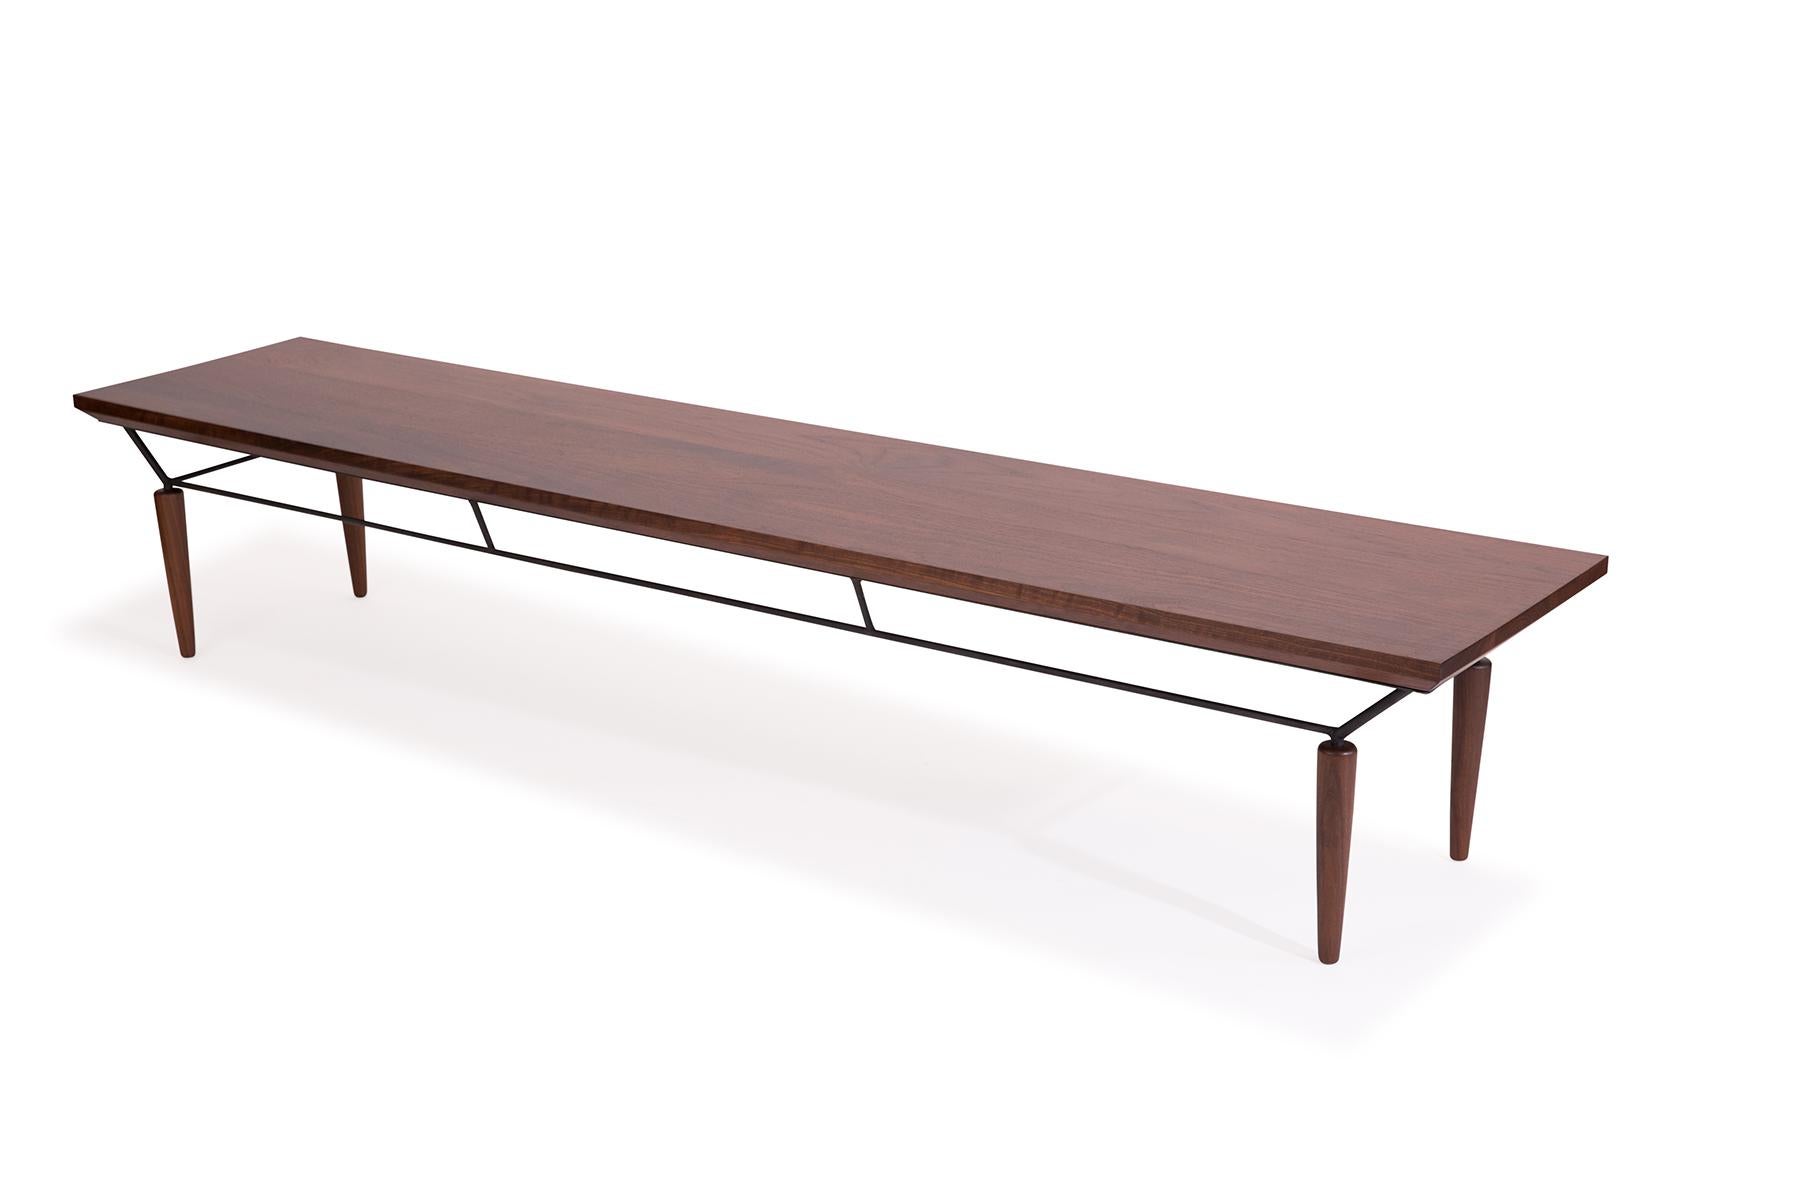 Allen Ditson solid walnut and iron bench or coffee table circa early 1960s. Top and legs are beautifully grained tapered walnut and stretchers and acents are patinated iron.